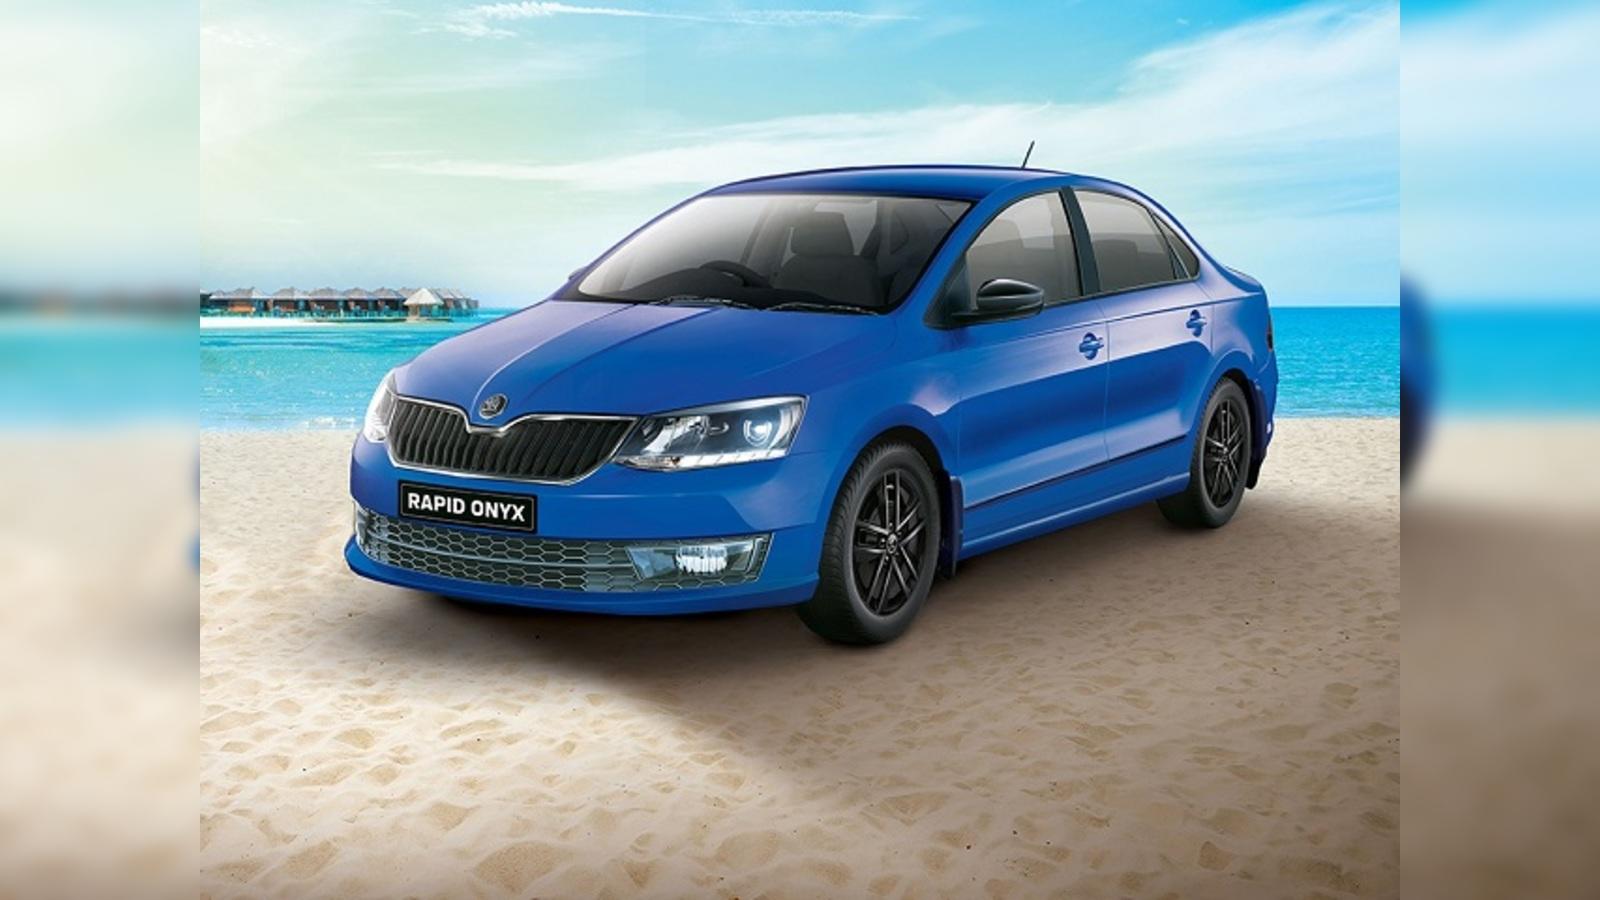 Skoda Rapid Dimensions - Size, Boot Space, Fuel Tank, Tyre Size